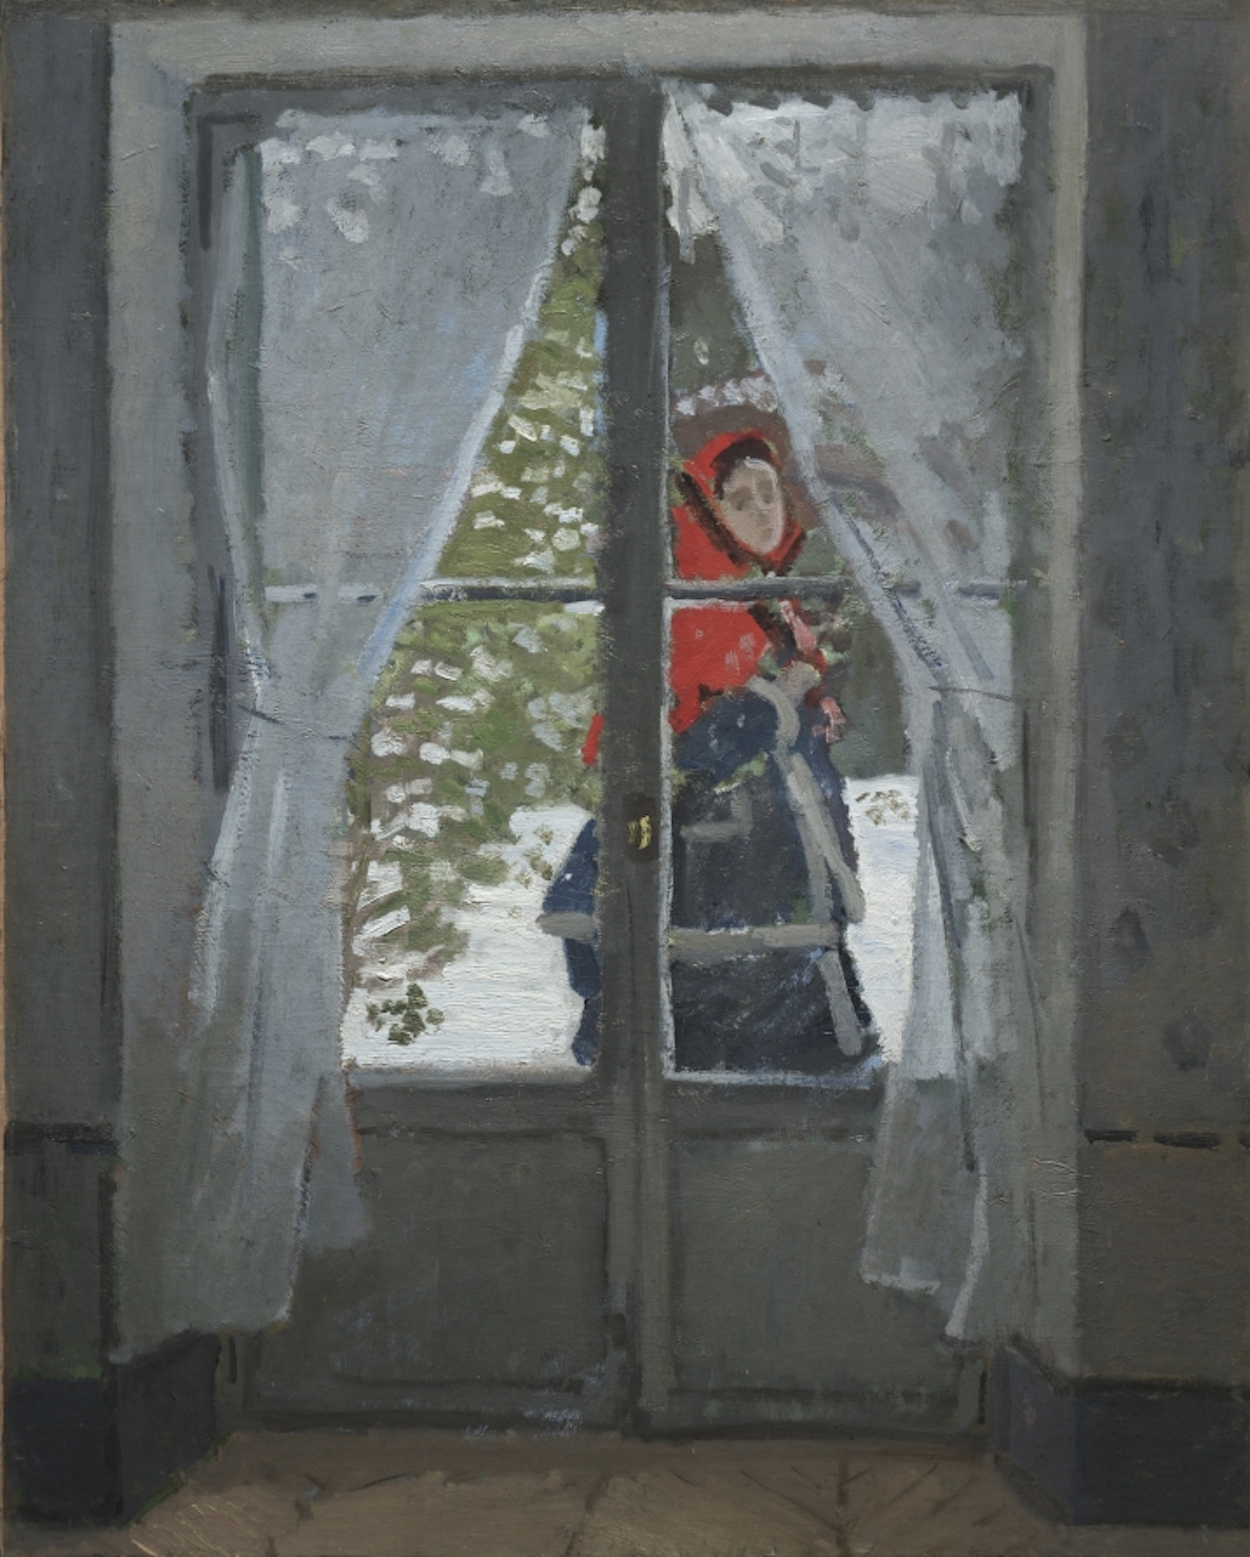 The Red Kerchief by Claude Monet - ca. 1868-1873 - 128.3 x 105.7 cm Cleveland Museum of Art